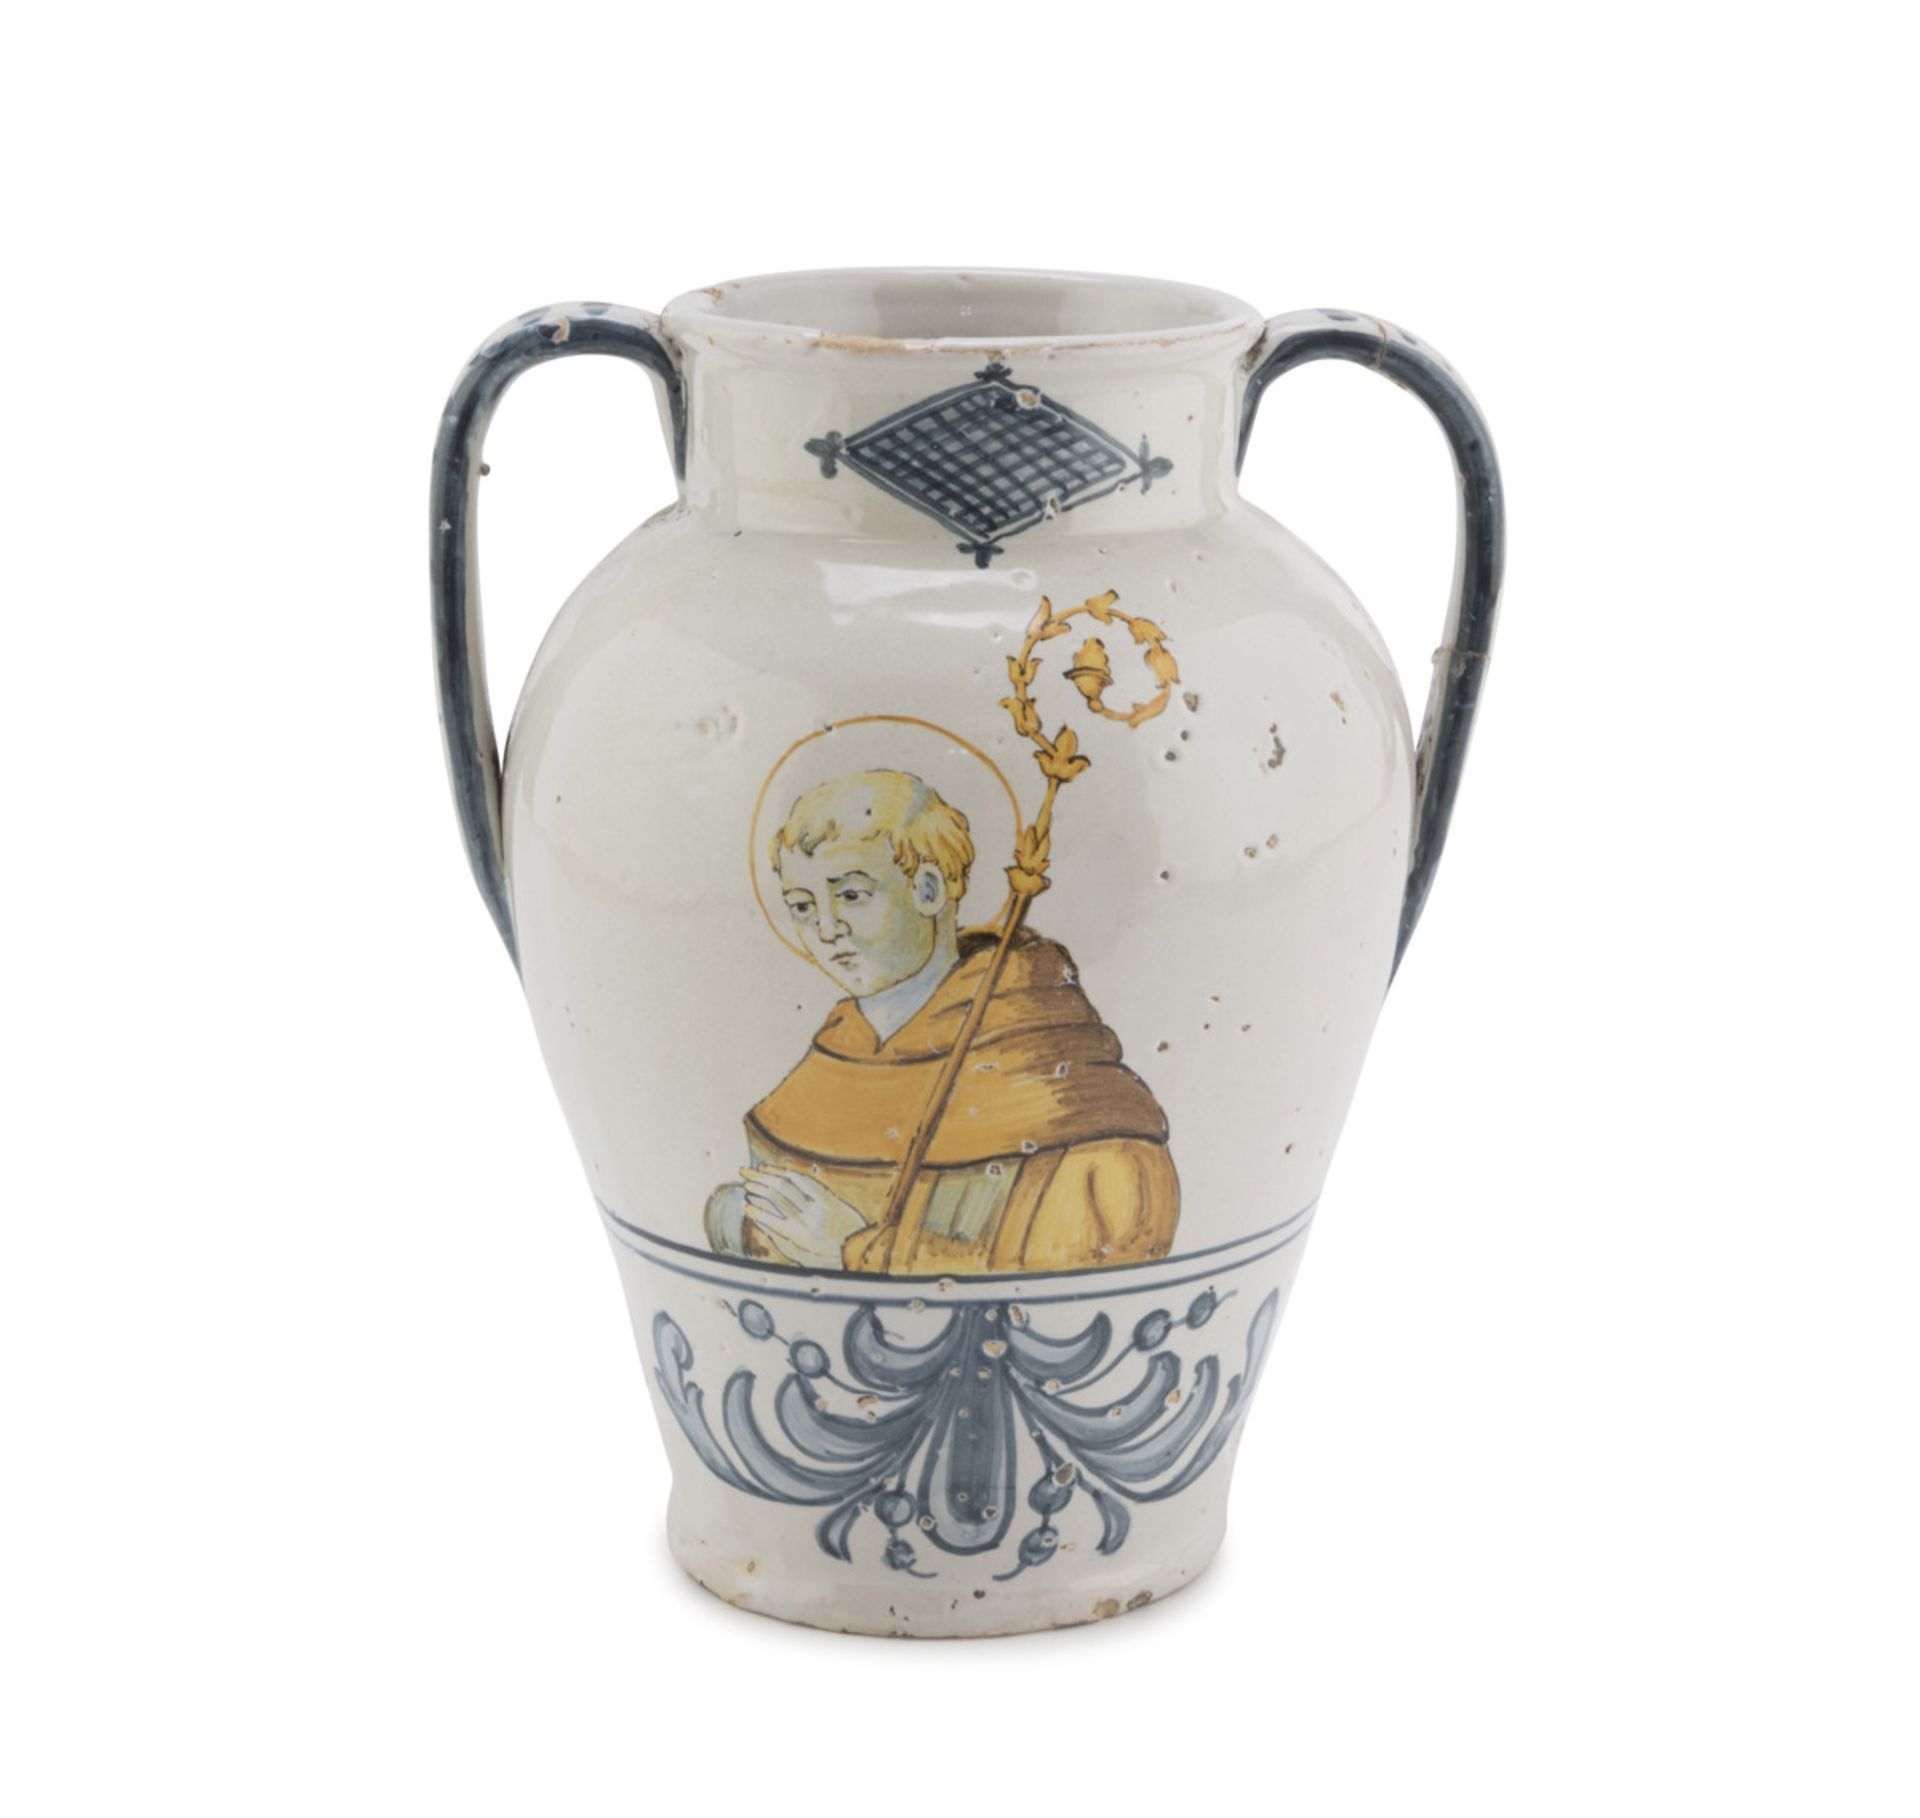 VASE IN CERAMICS, PROBABLY BASSANO, 19TH CENTURY in white enamel and polychromy, decorated with